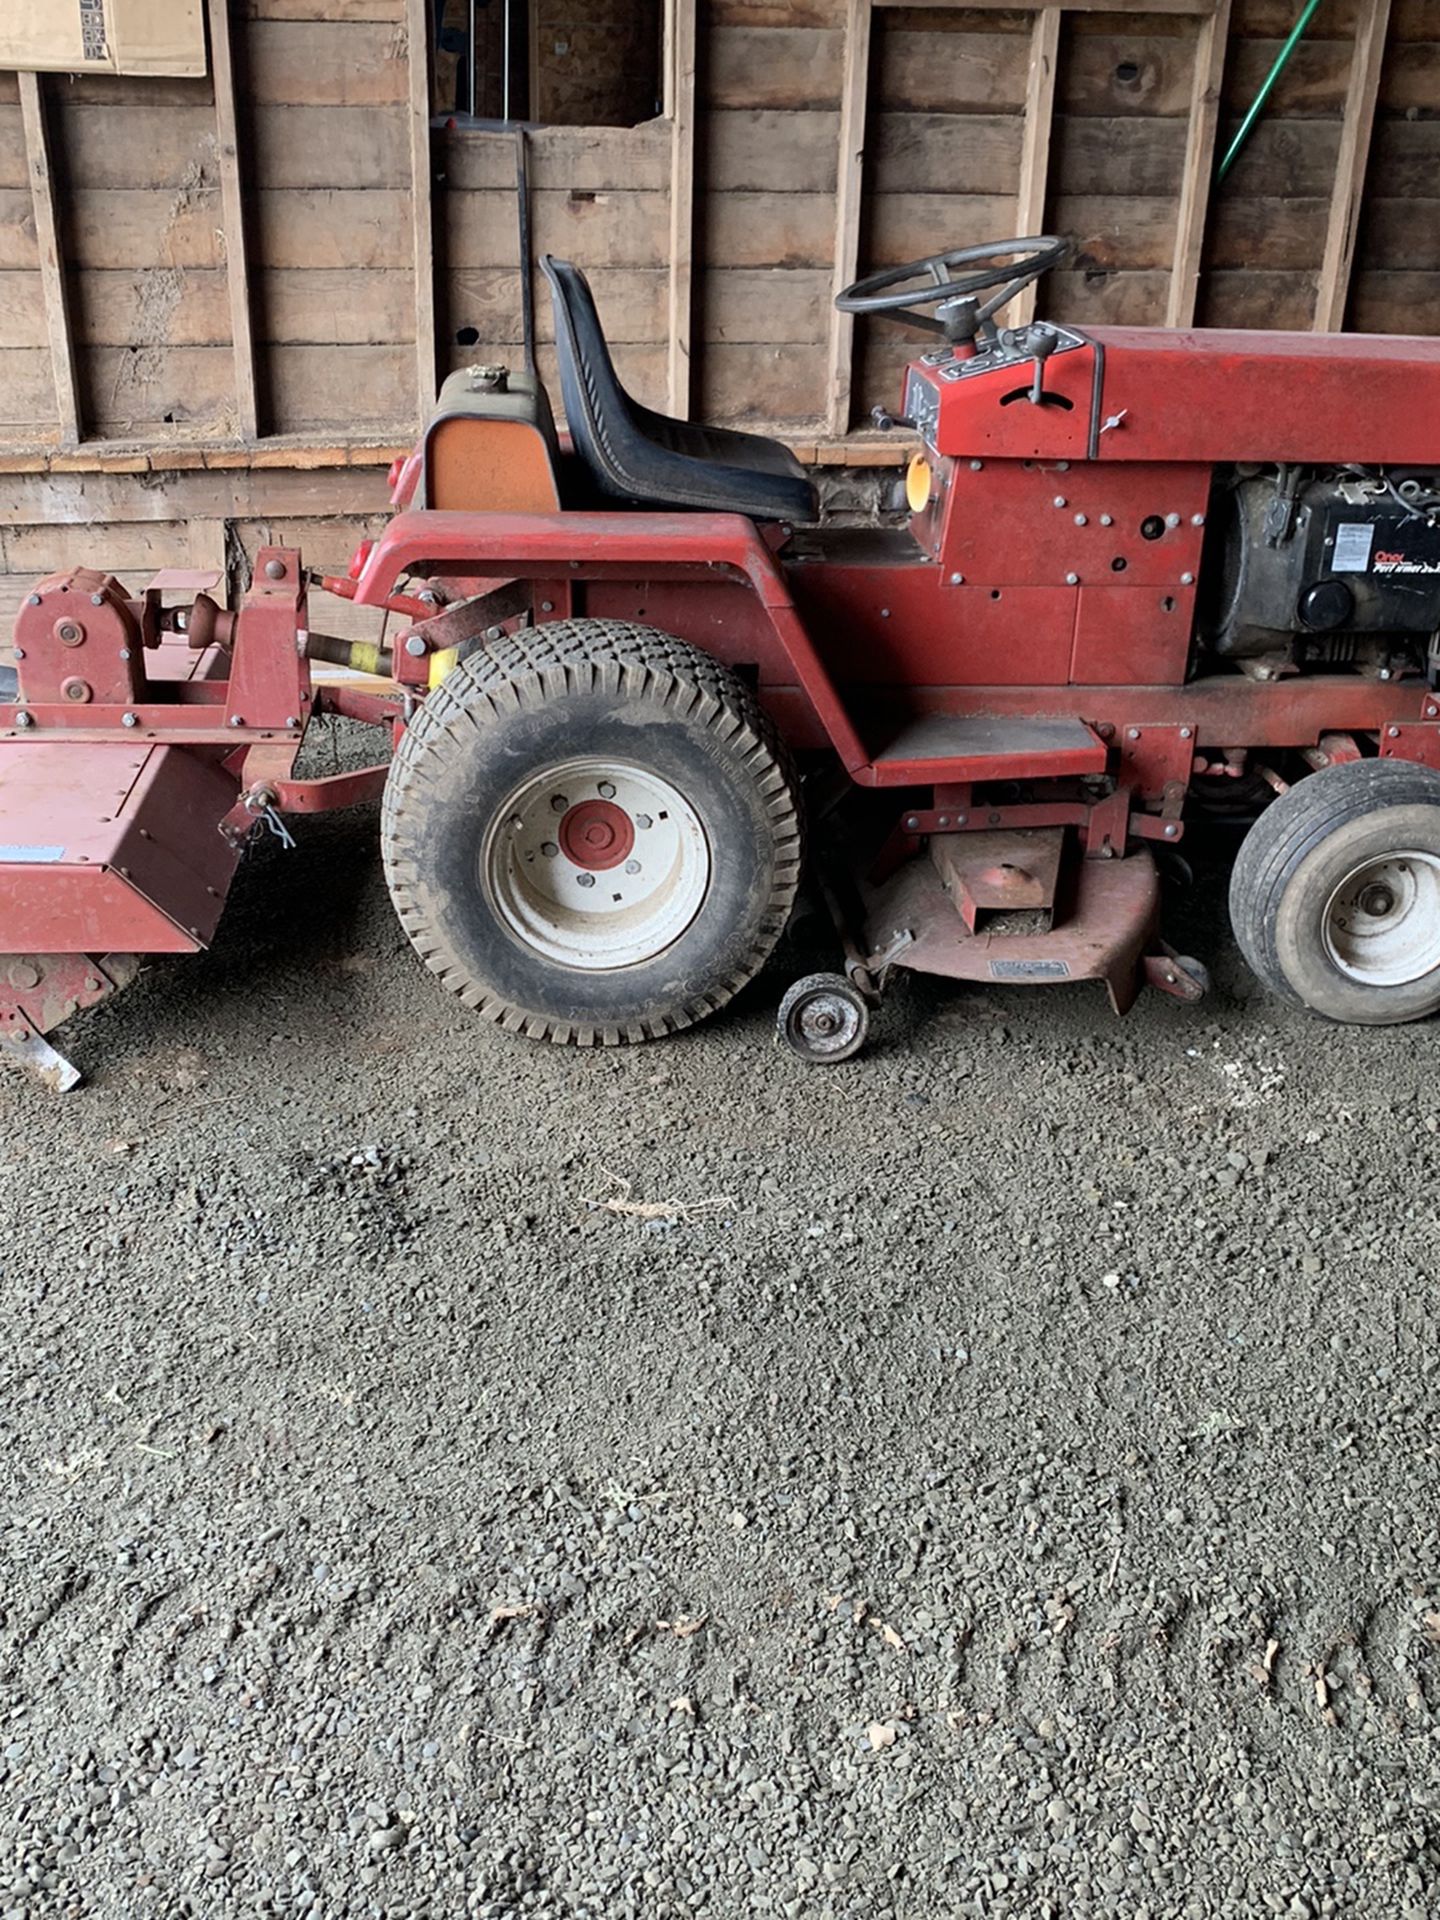 Wheel Horse Hydraulic Tractor With 60” Cutting Deck And Rototiller 